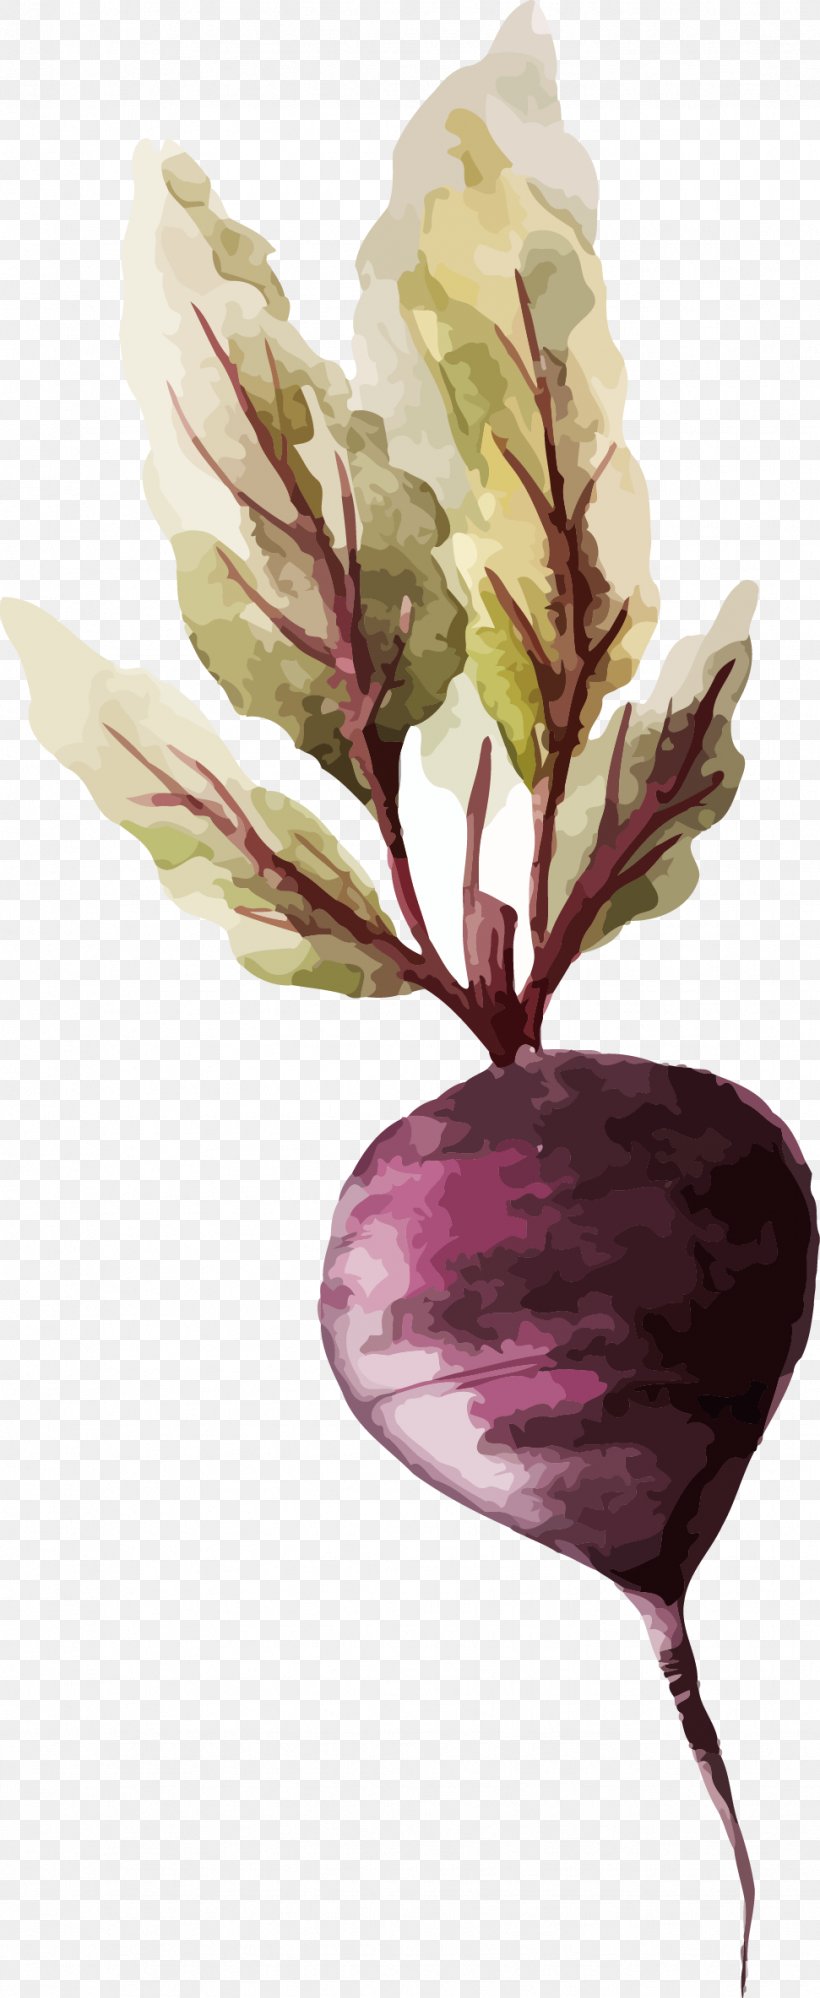 Watercolor Painting Vegetable Drawing Illustration, PNG, 971x2367px, Watercolor Painting, Beetroot, Branch, Carrot, Drawing Download Free